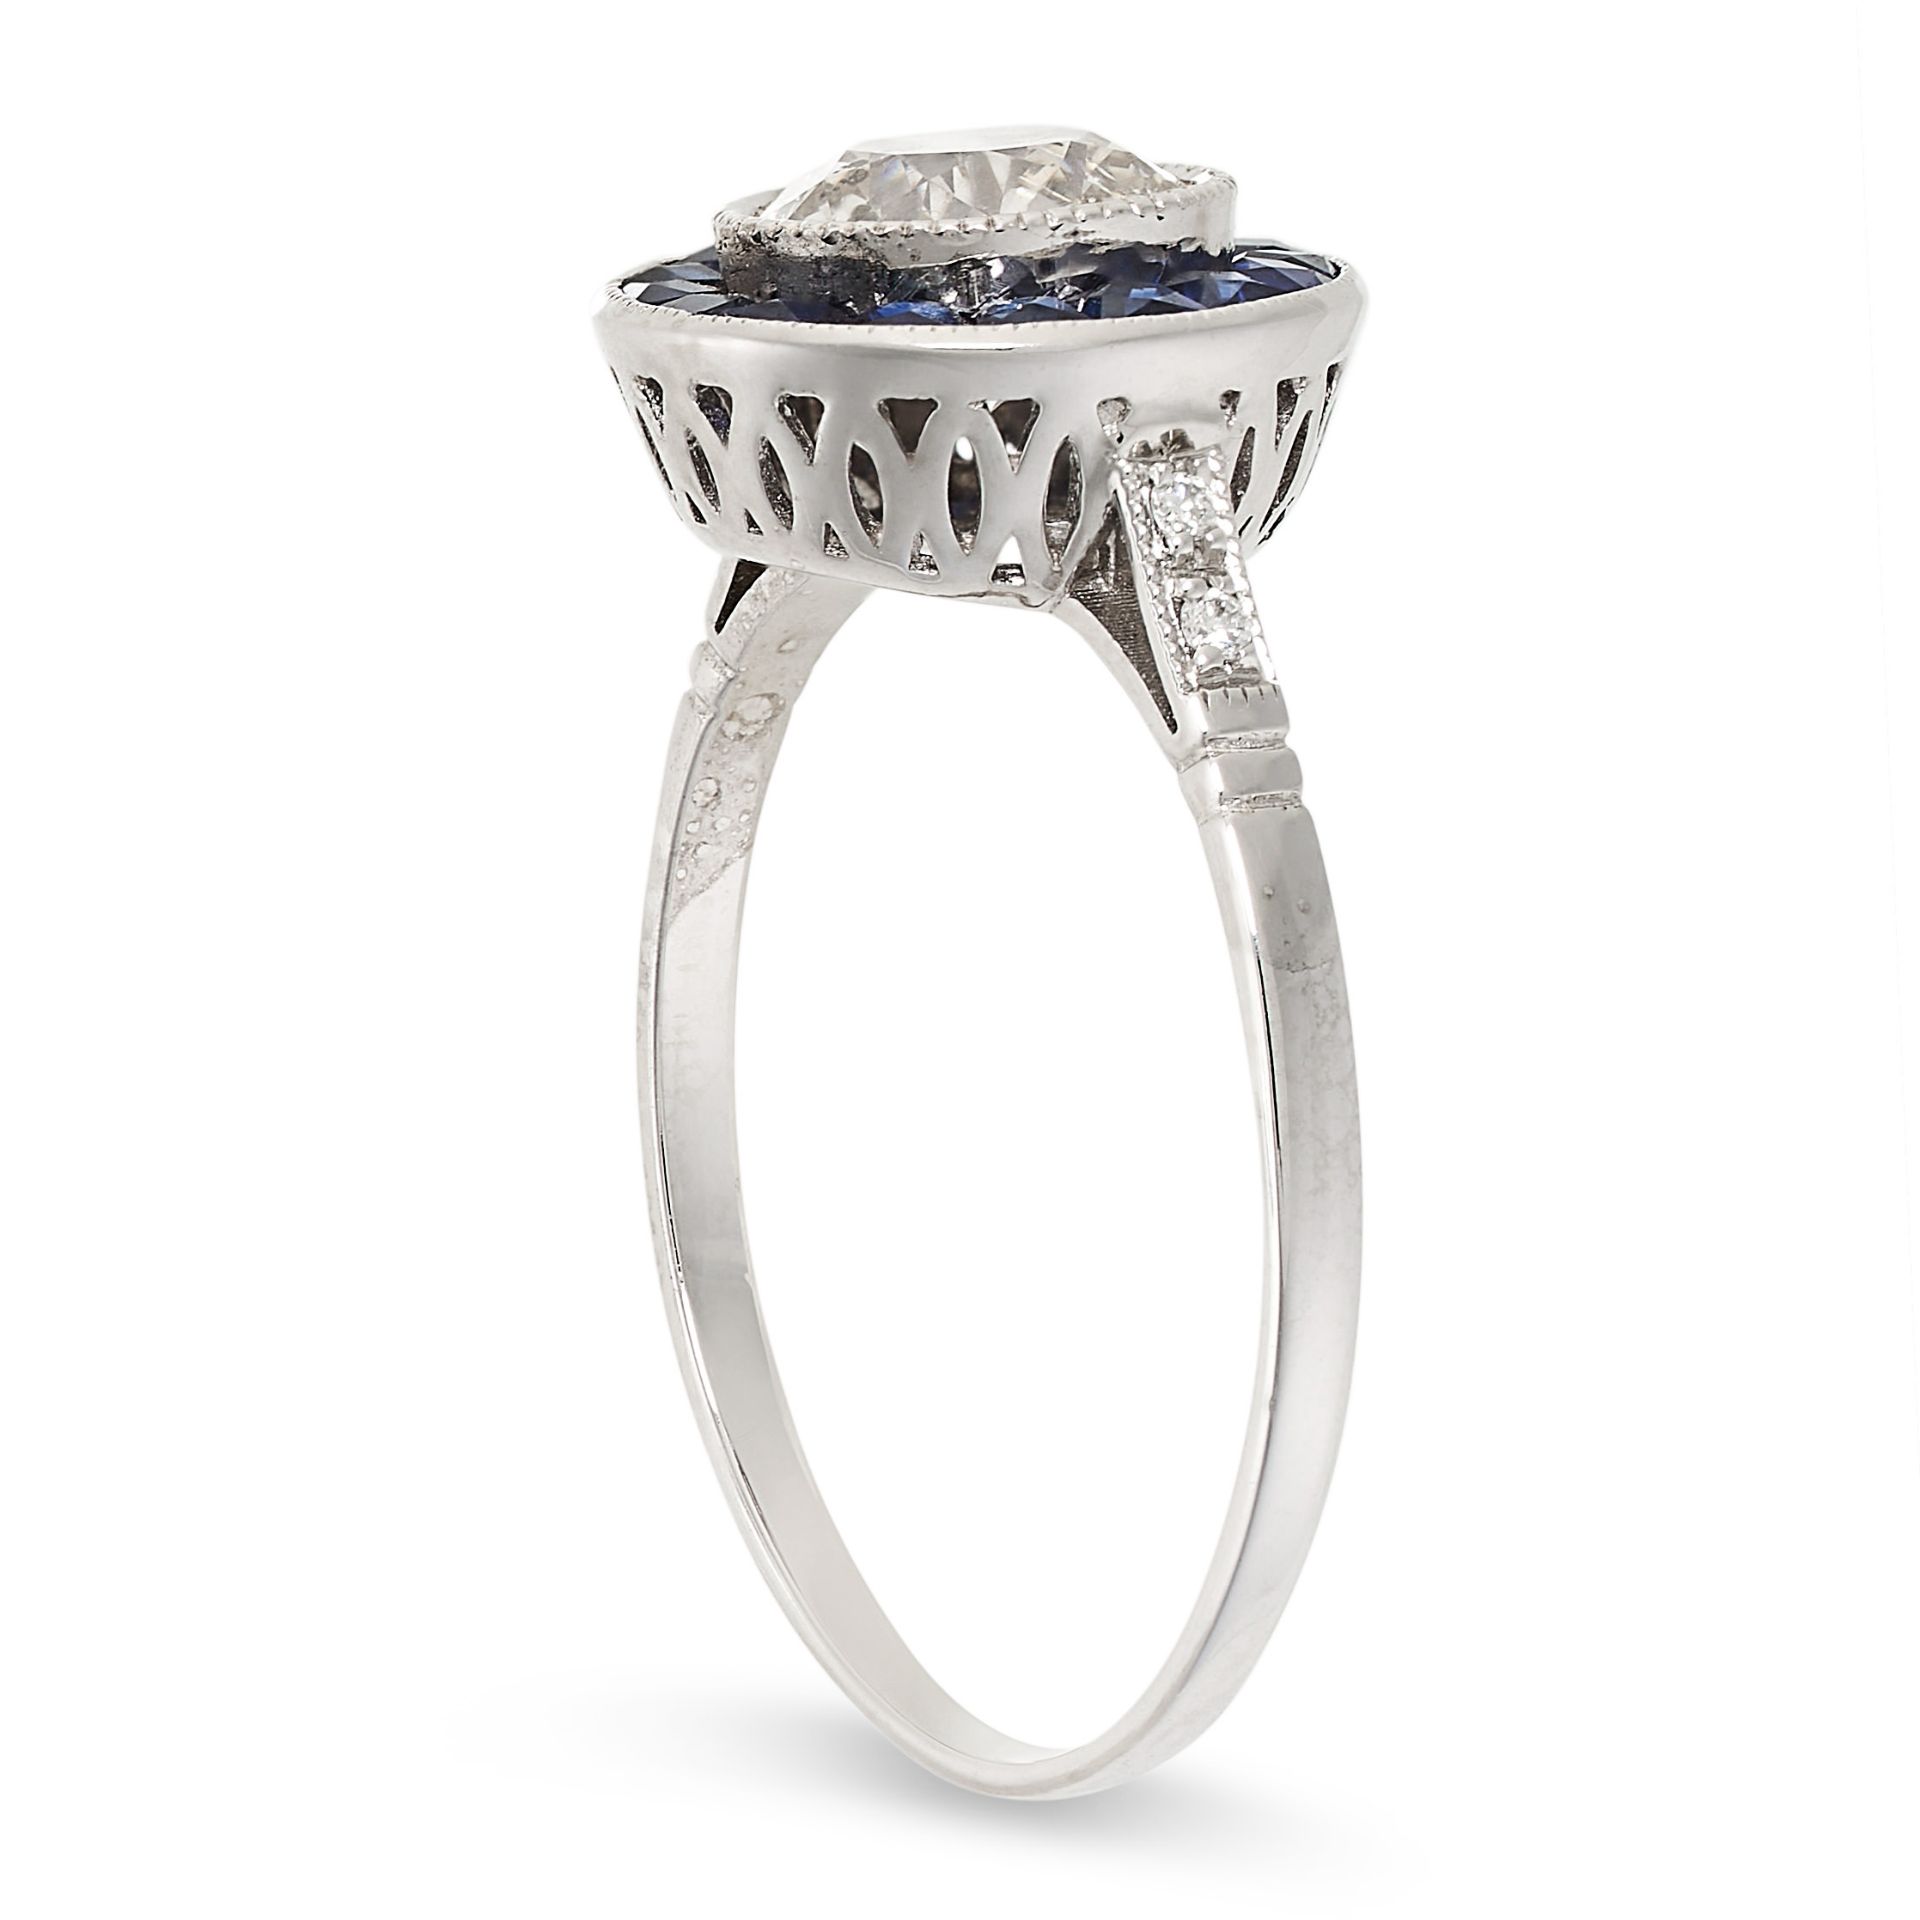 A DIAMOND AND SAPPHIRE TARGET RING set with a round cut diamond of 1.01 carats within a border of - Image 2 of 2